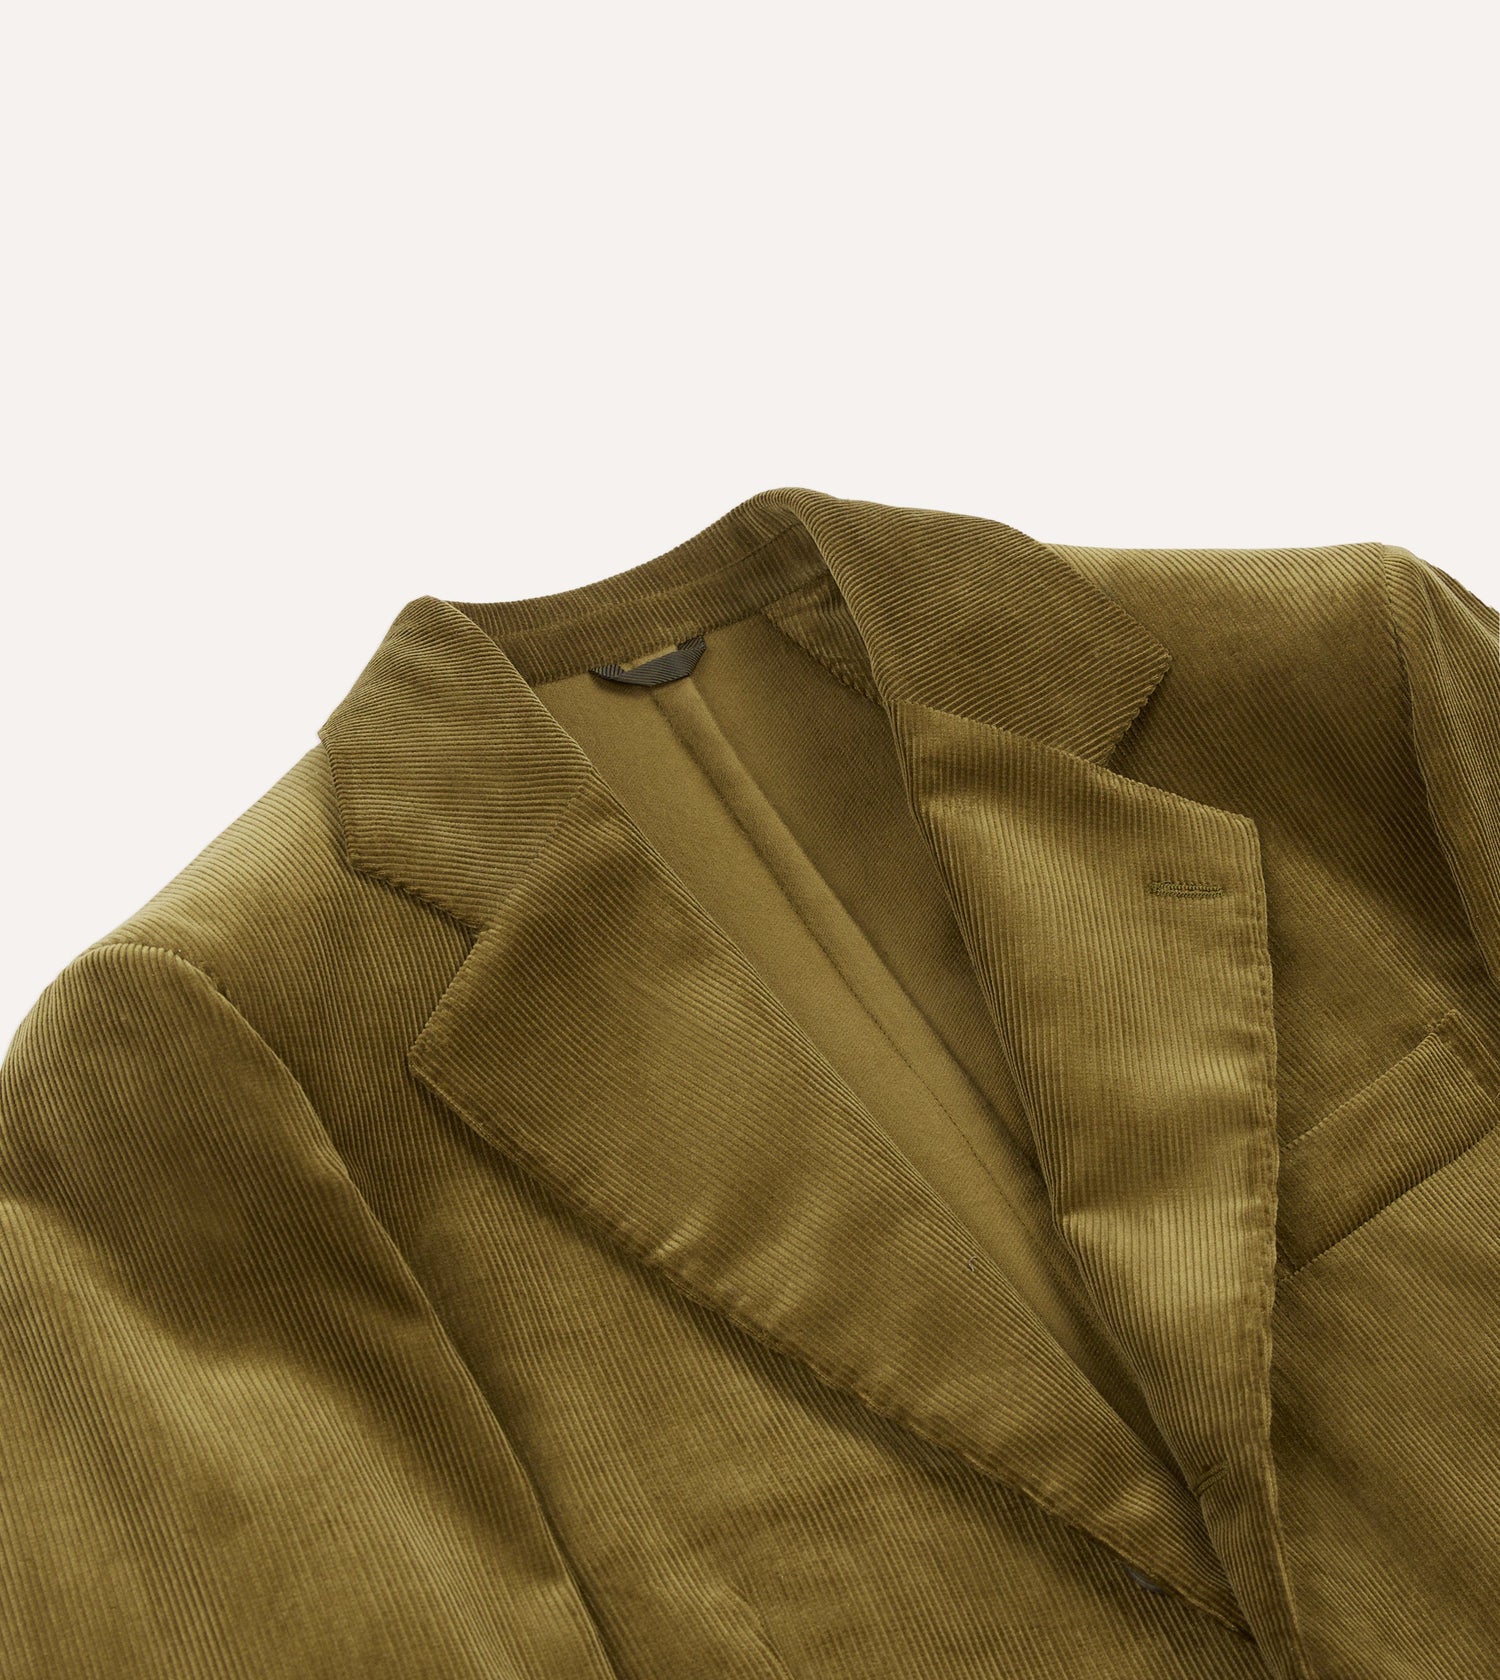 Olive Green Mid-Wale Cotton Corduroy Tailored Jacket